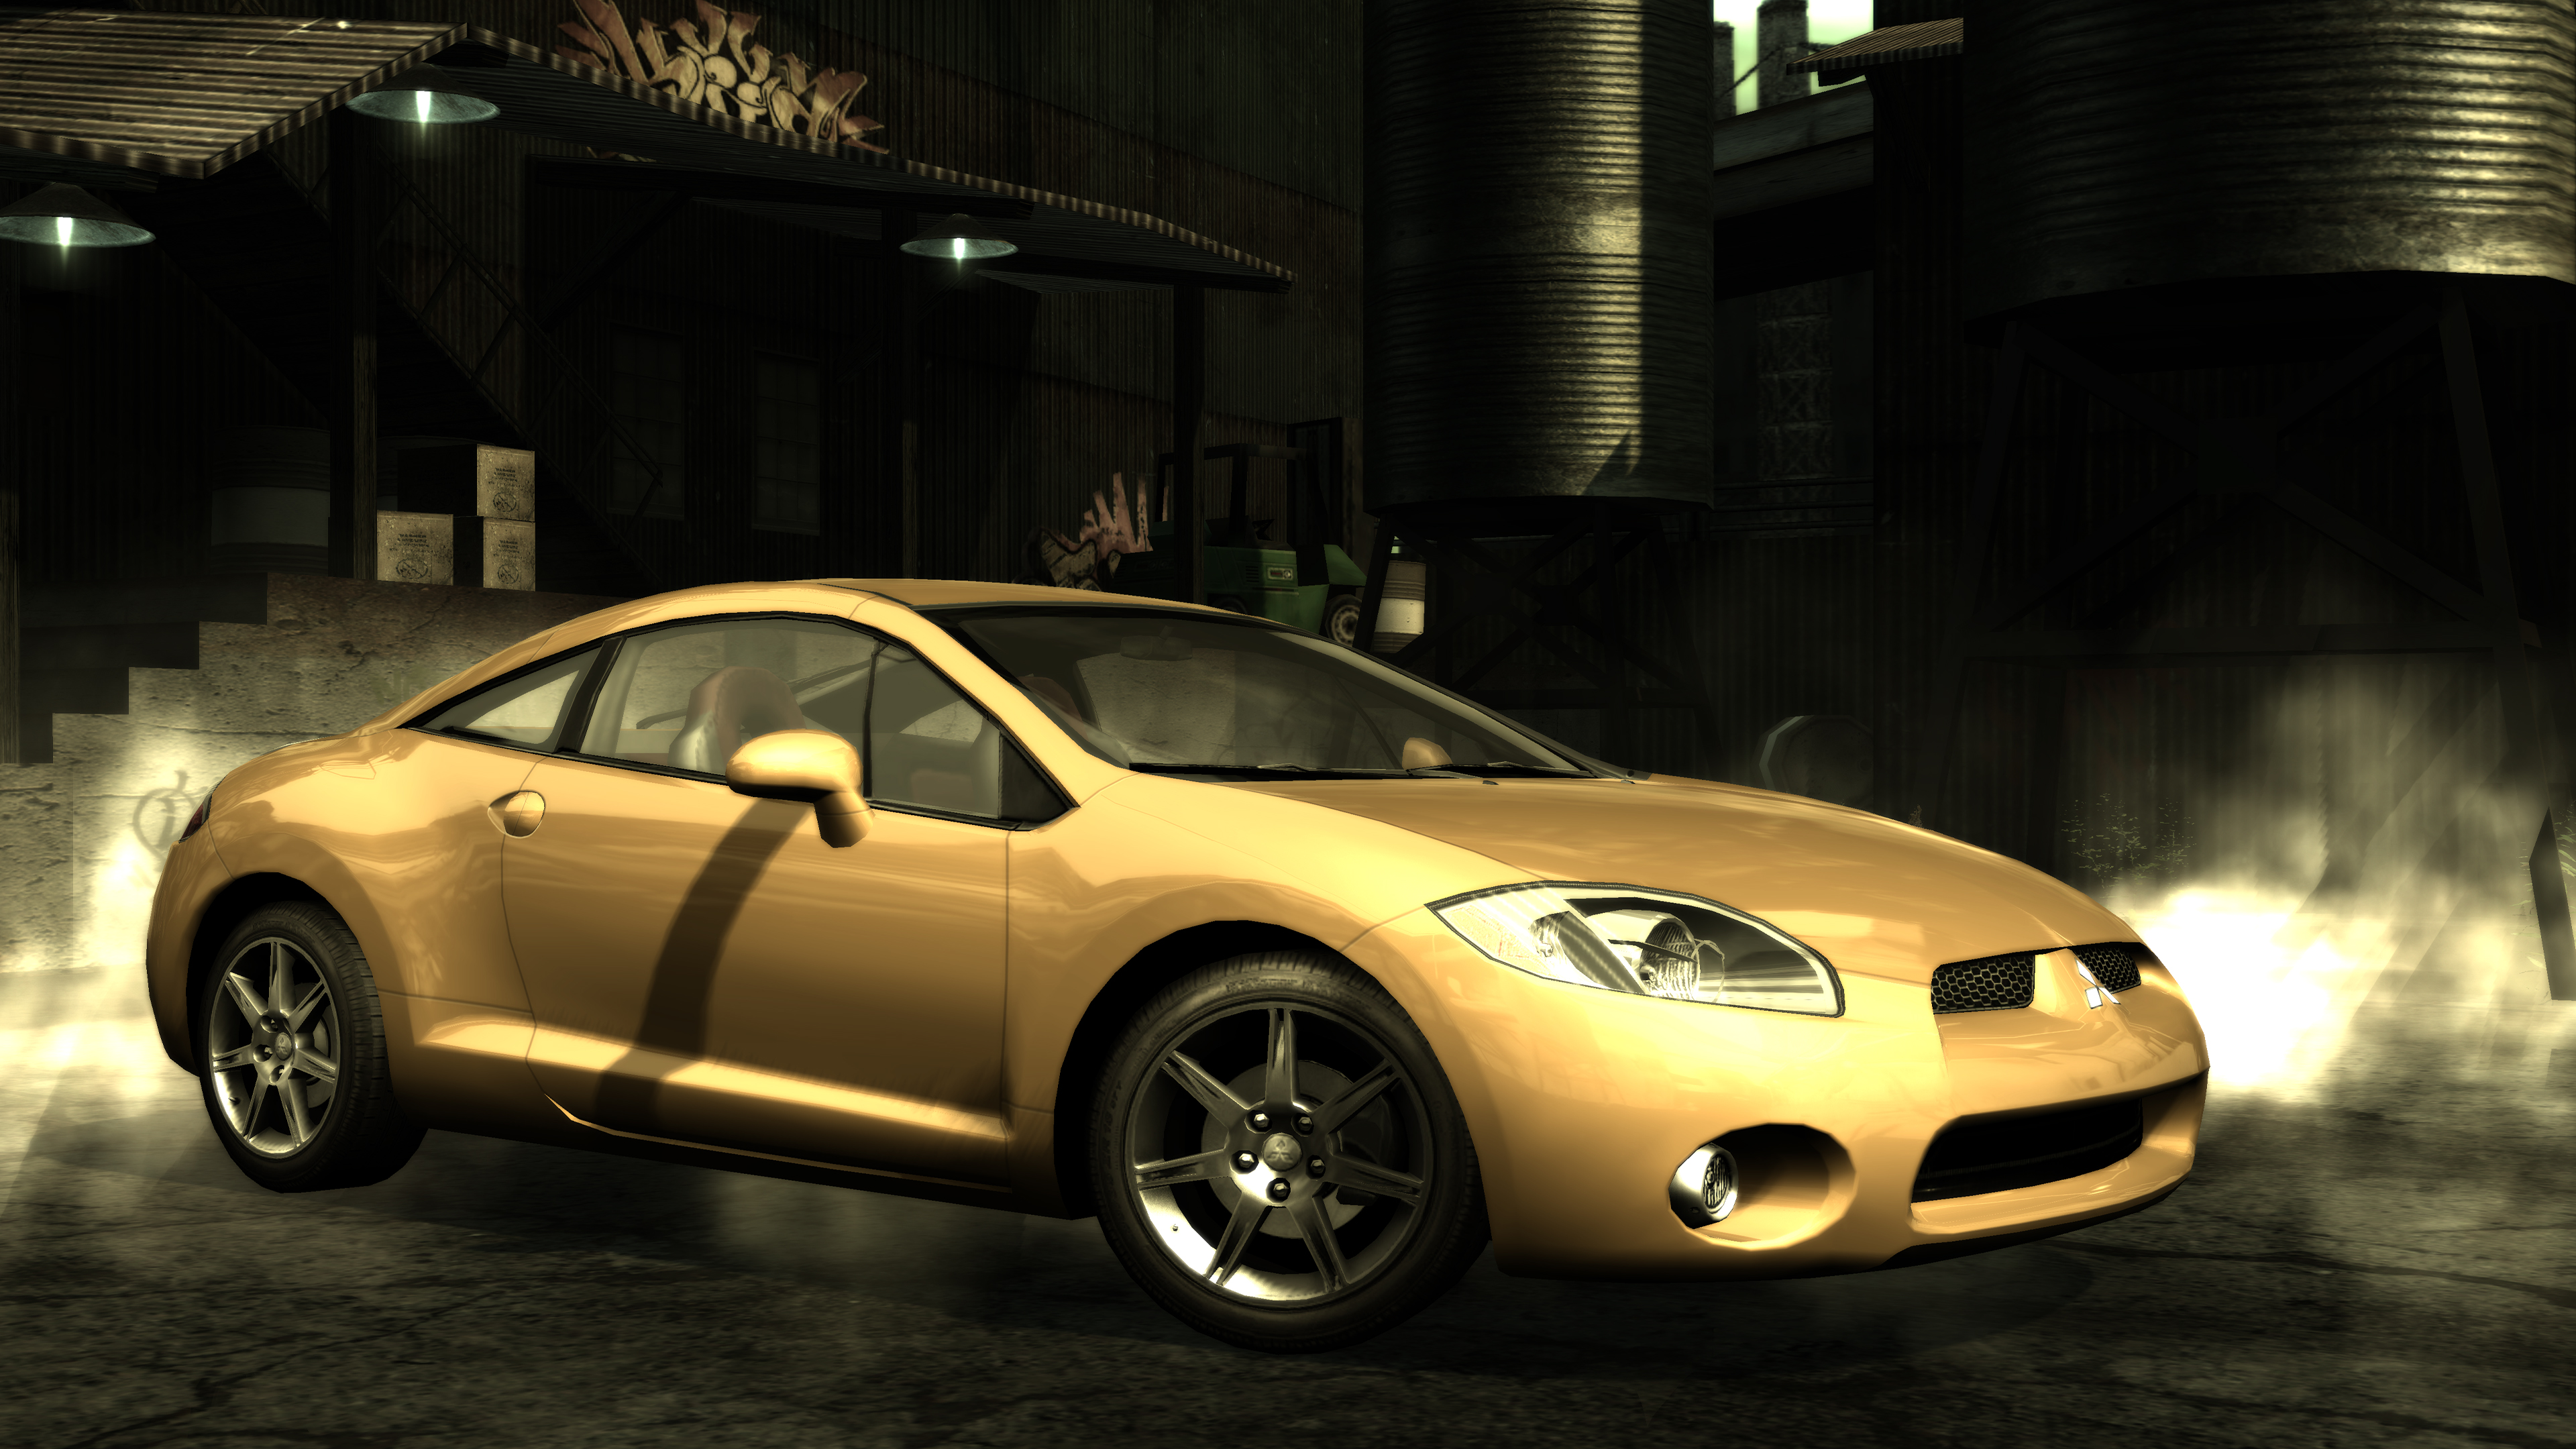 Motor City Online, Need for Speed Wiki